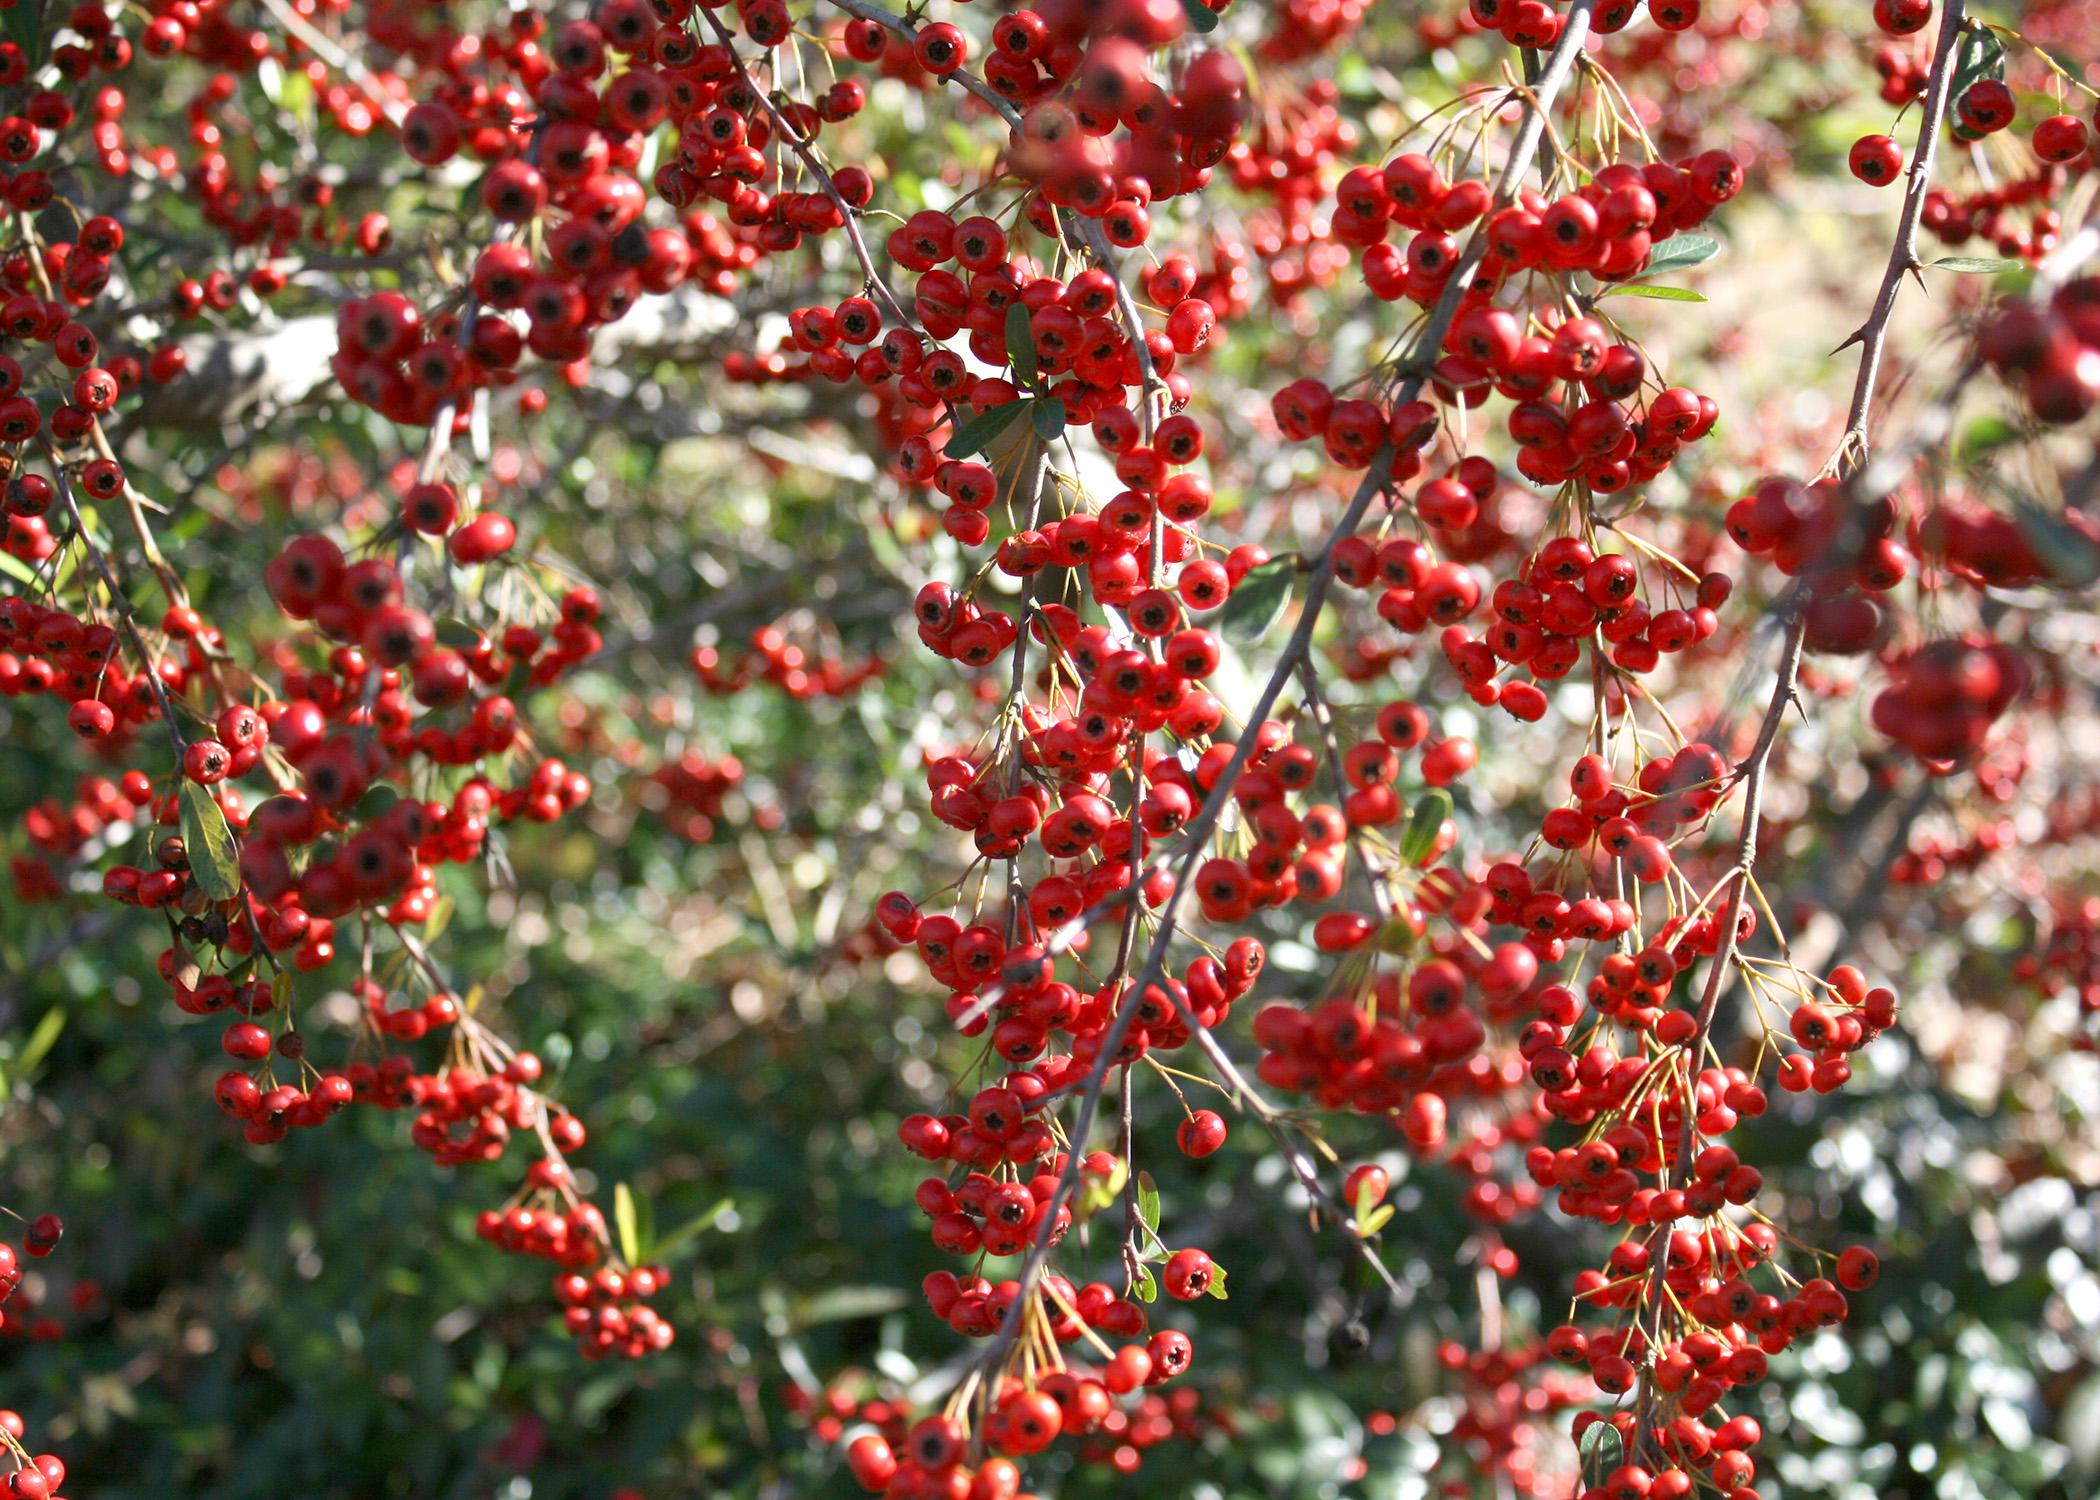 Pyracantha's colorful berries can add beauty and interest to any winter landscape. (Photo by MSU Extension Service/Gary Bachman)